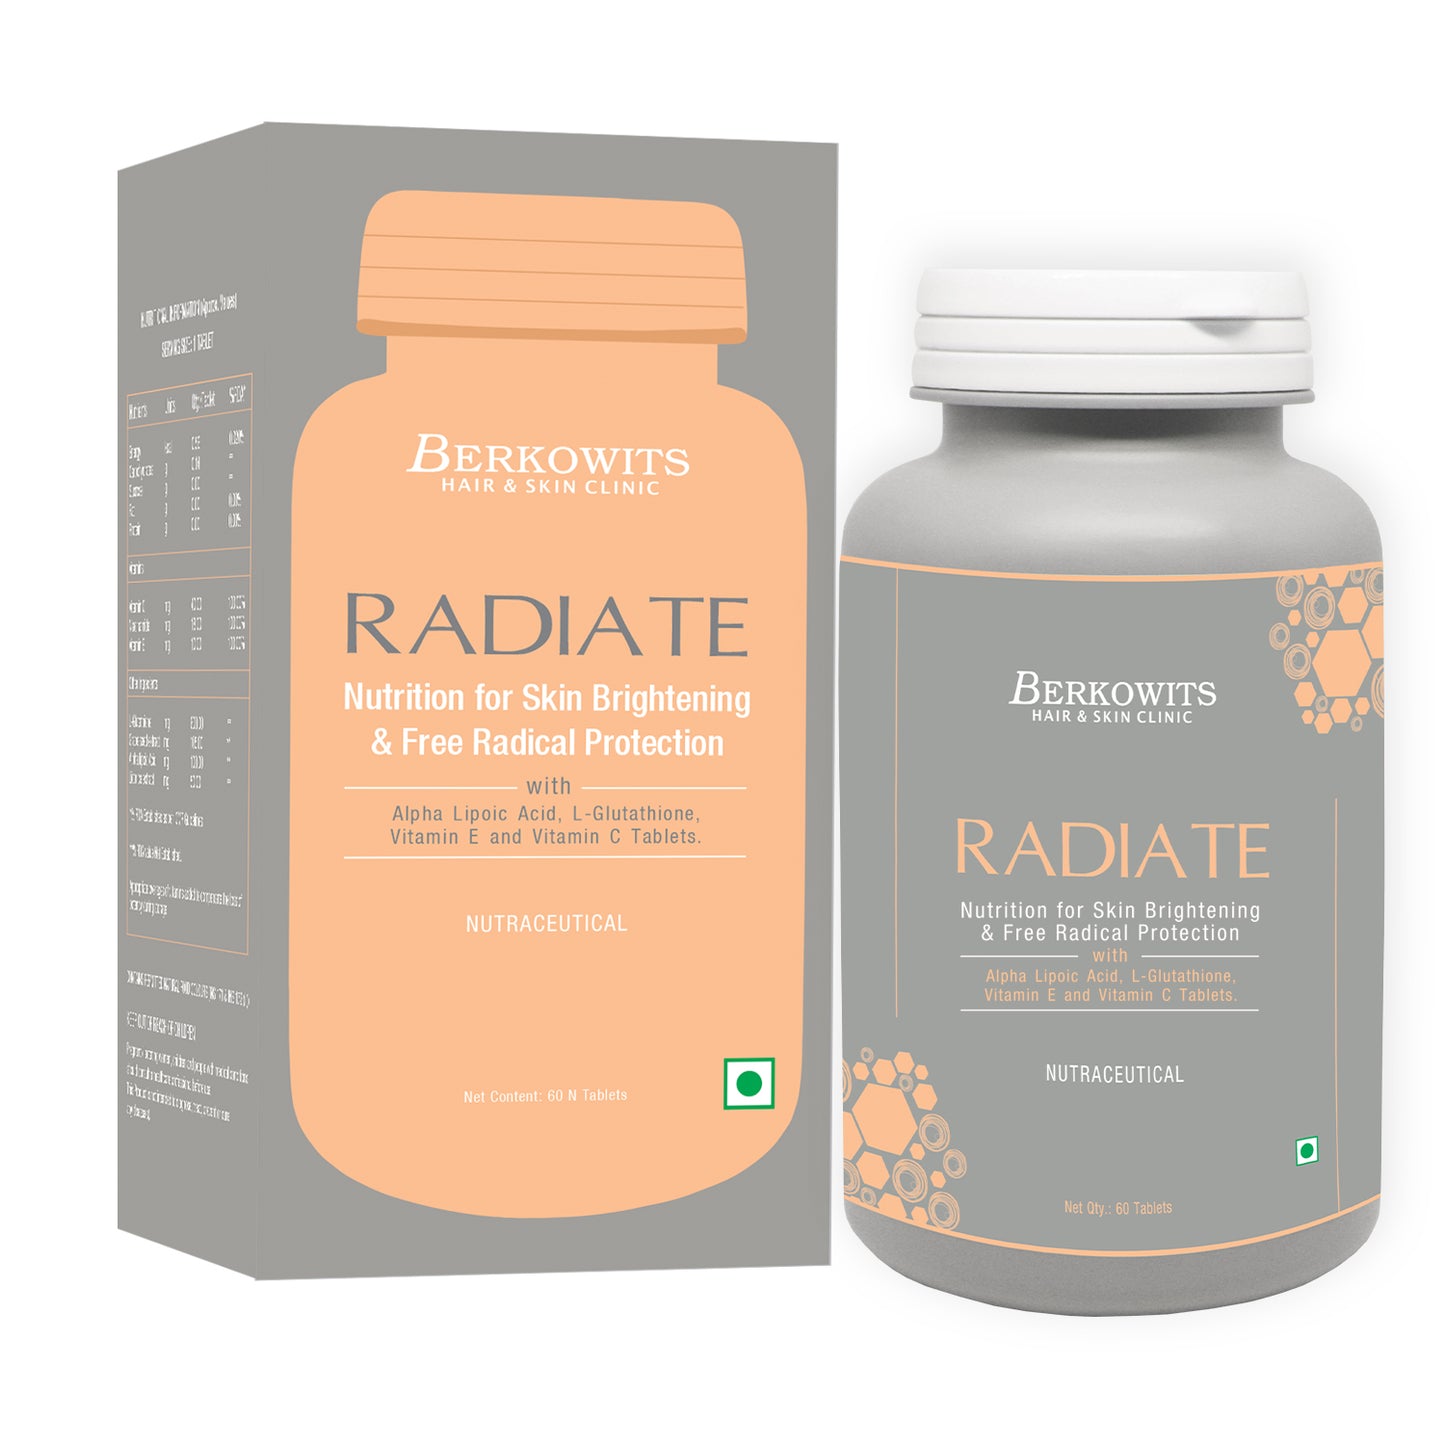 Berkowits Radiate L Glutathione 600mg Nutrition For Glowing and Healthy Skin with Vitamin C, E and Alpha Lipoic Acid- 60 Servings